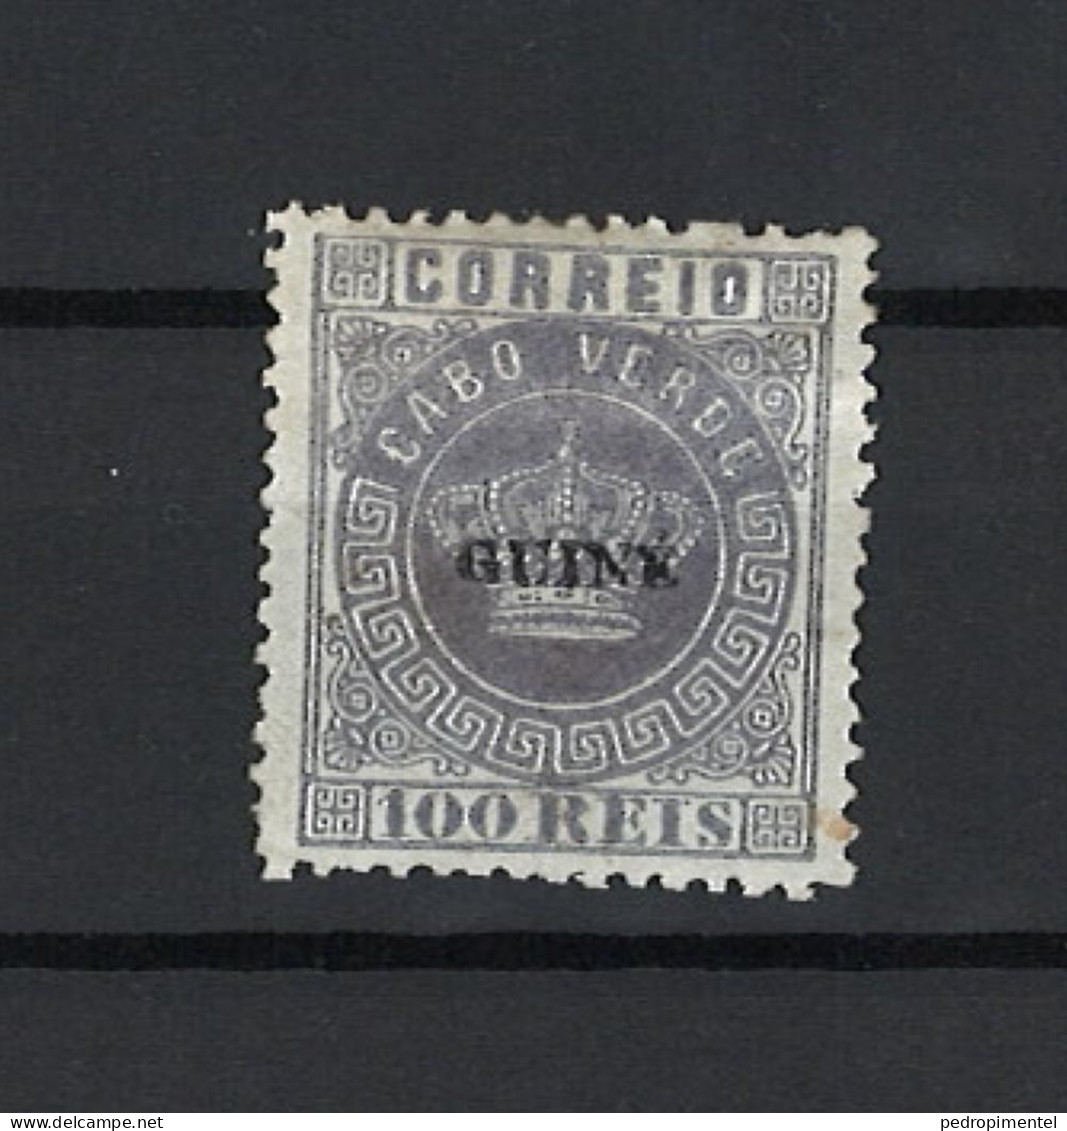 Portugal Guinee 1879-82 First Issue (Crown With Small GUINE Surcharge) 100 Reis Condition MH NGAI Mundifil Guinee #7 - Guinée Portugaise